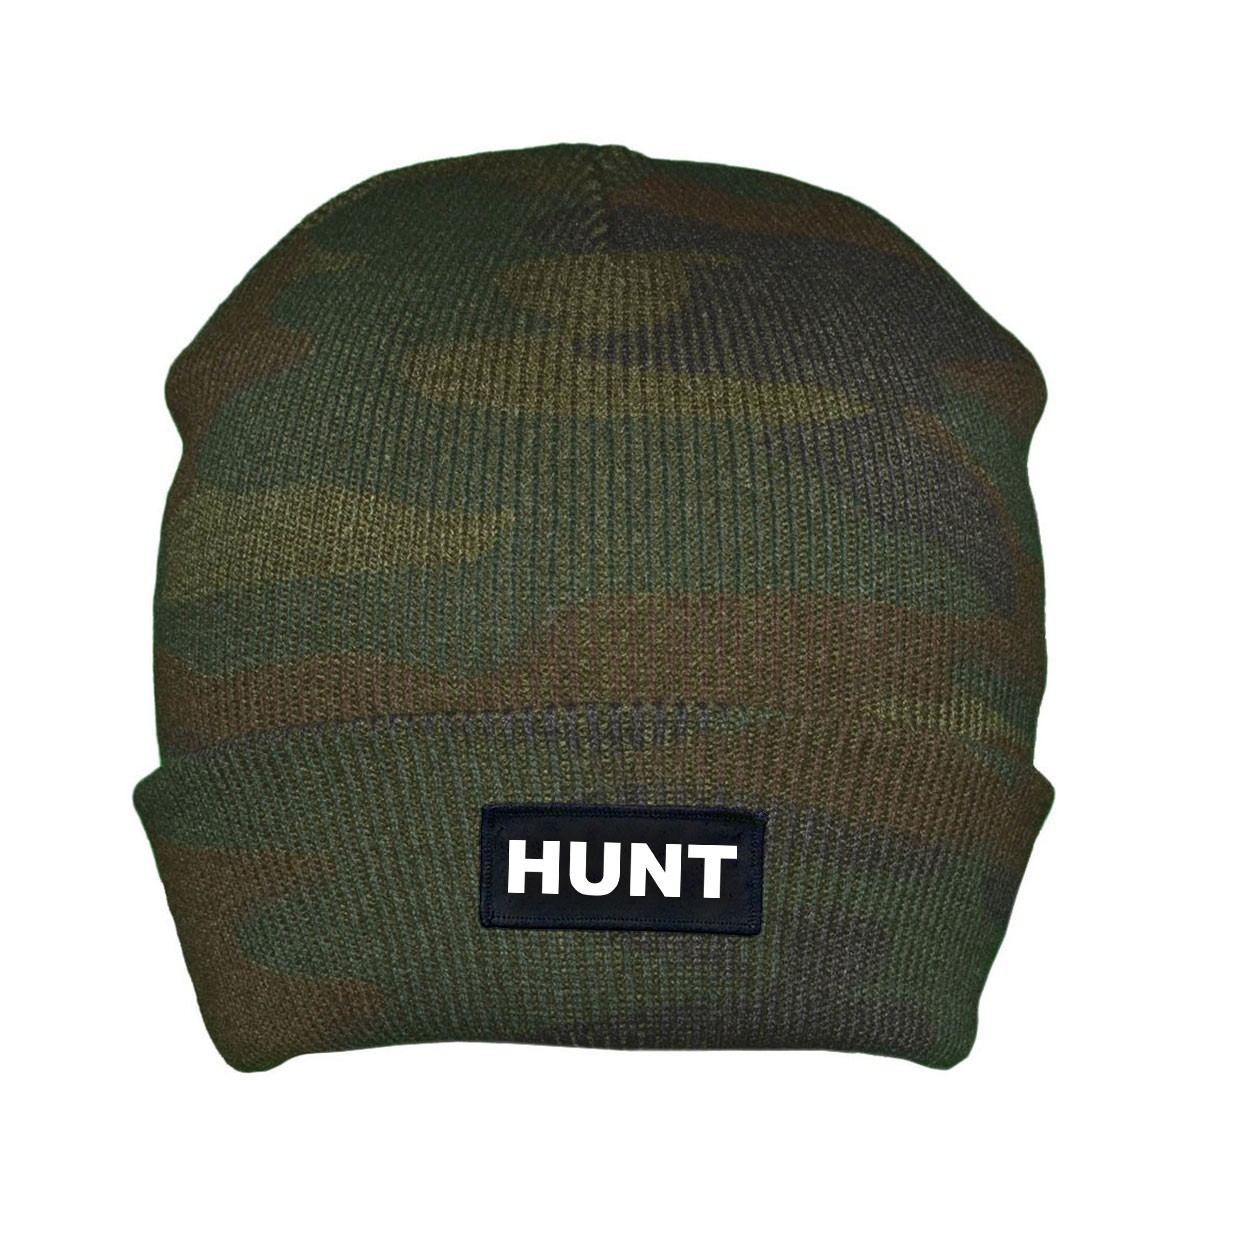 Hunt Brand Logo Night Out Woven Patch Roll Up Skully Beanie Camo (White Logo)